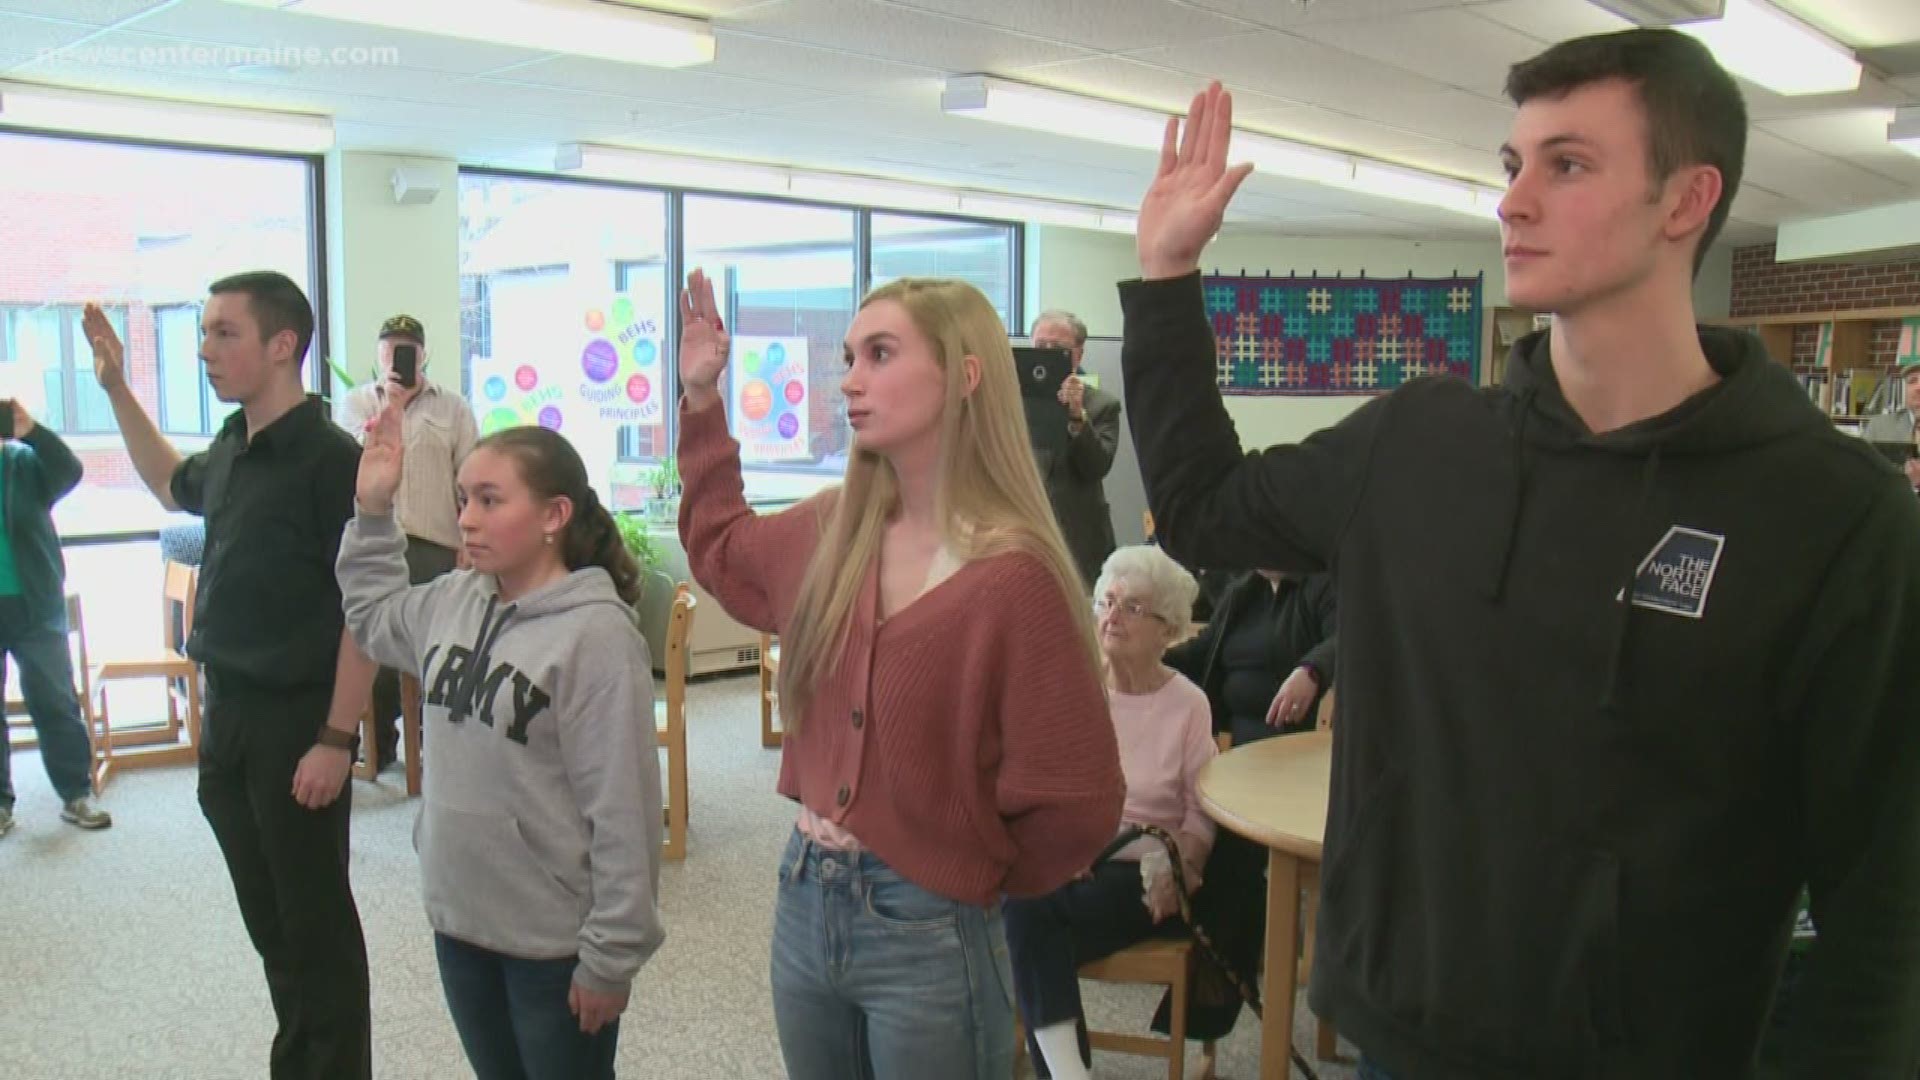 Maine teens high-flying oath ceremony